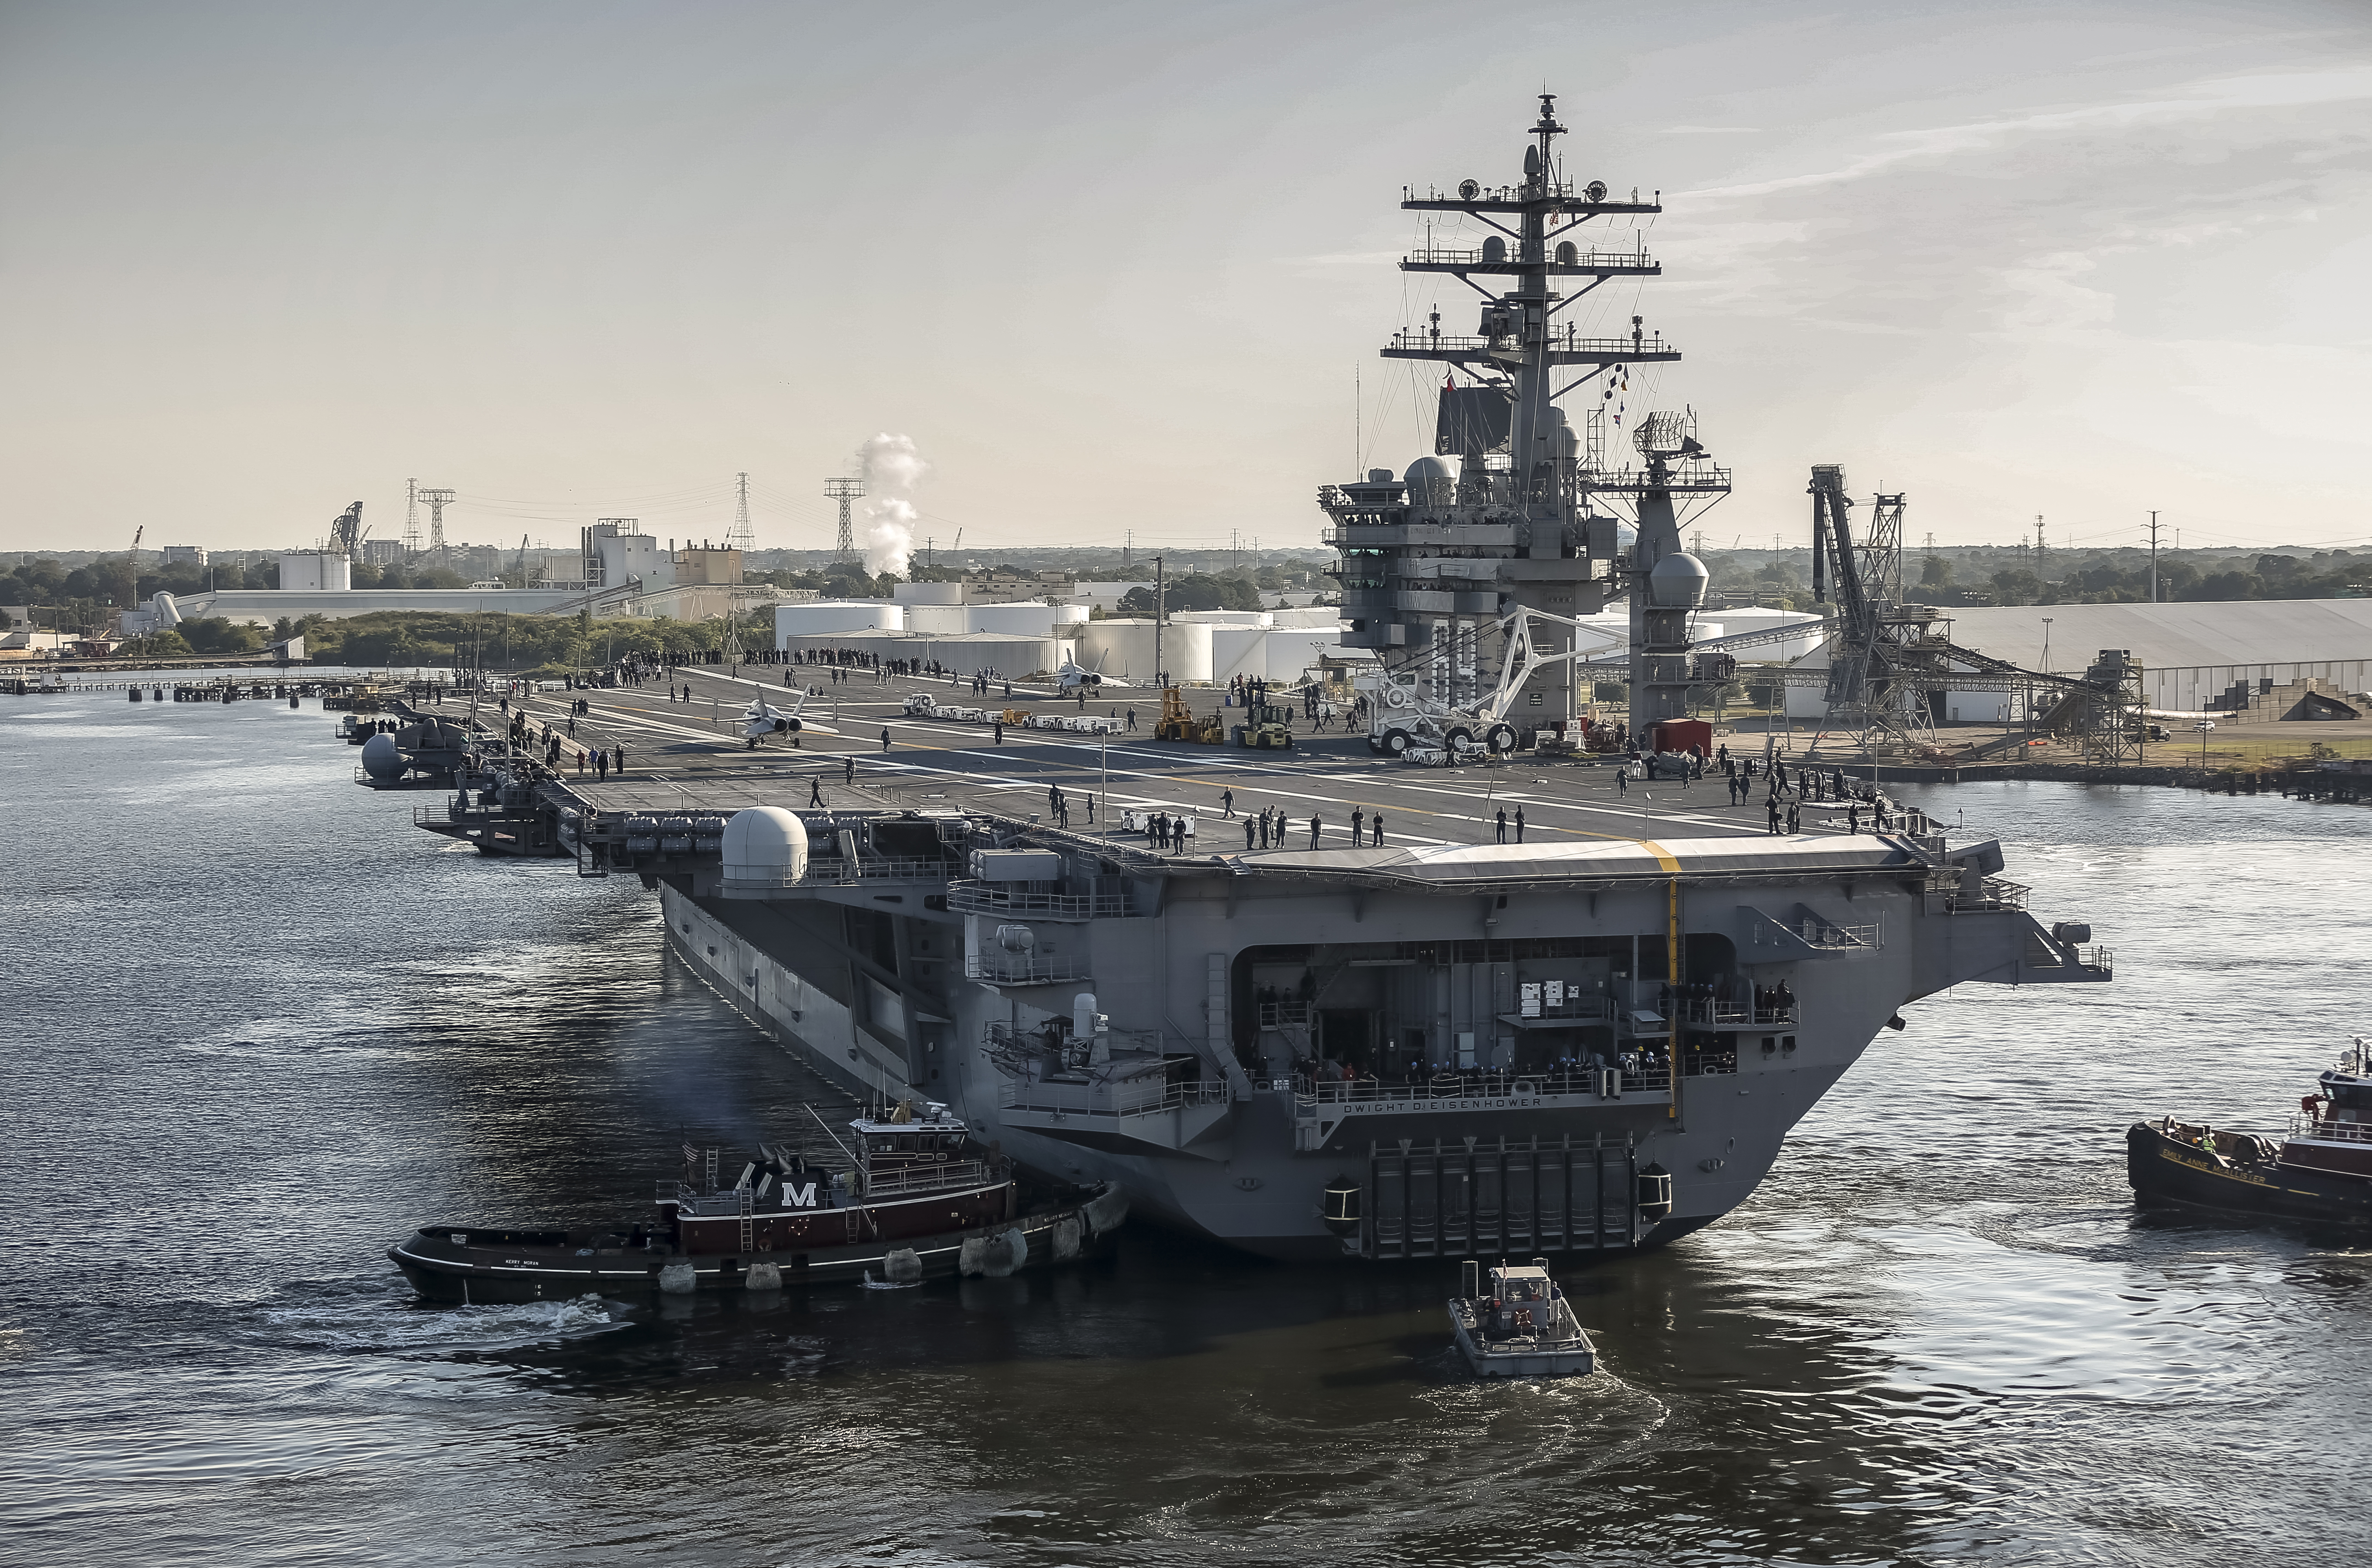 150828-N-MA158-005 PORTSMOUTH, Va. (Aug. 28, 2015) The aircraft carrier USS Dwight D. Eisenhower (CVN 69) departs Norfolk Naval Shipyard following successful completion of its drydocking planned incremental availability. (U.S. Navy photo by Shayne Hensley/Released)